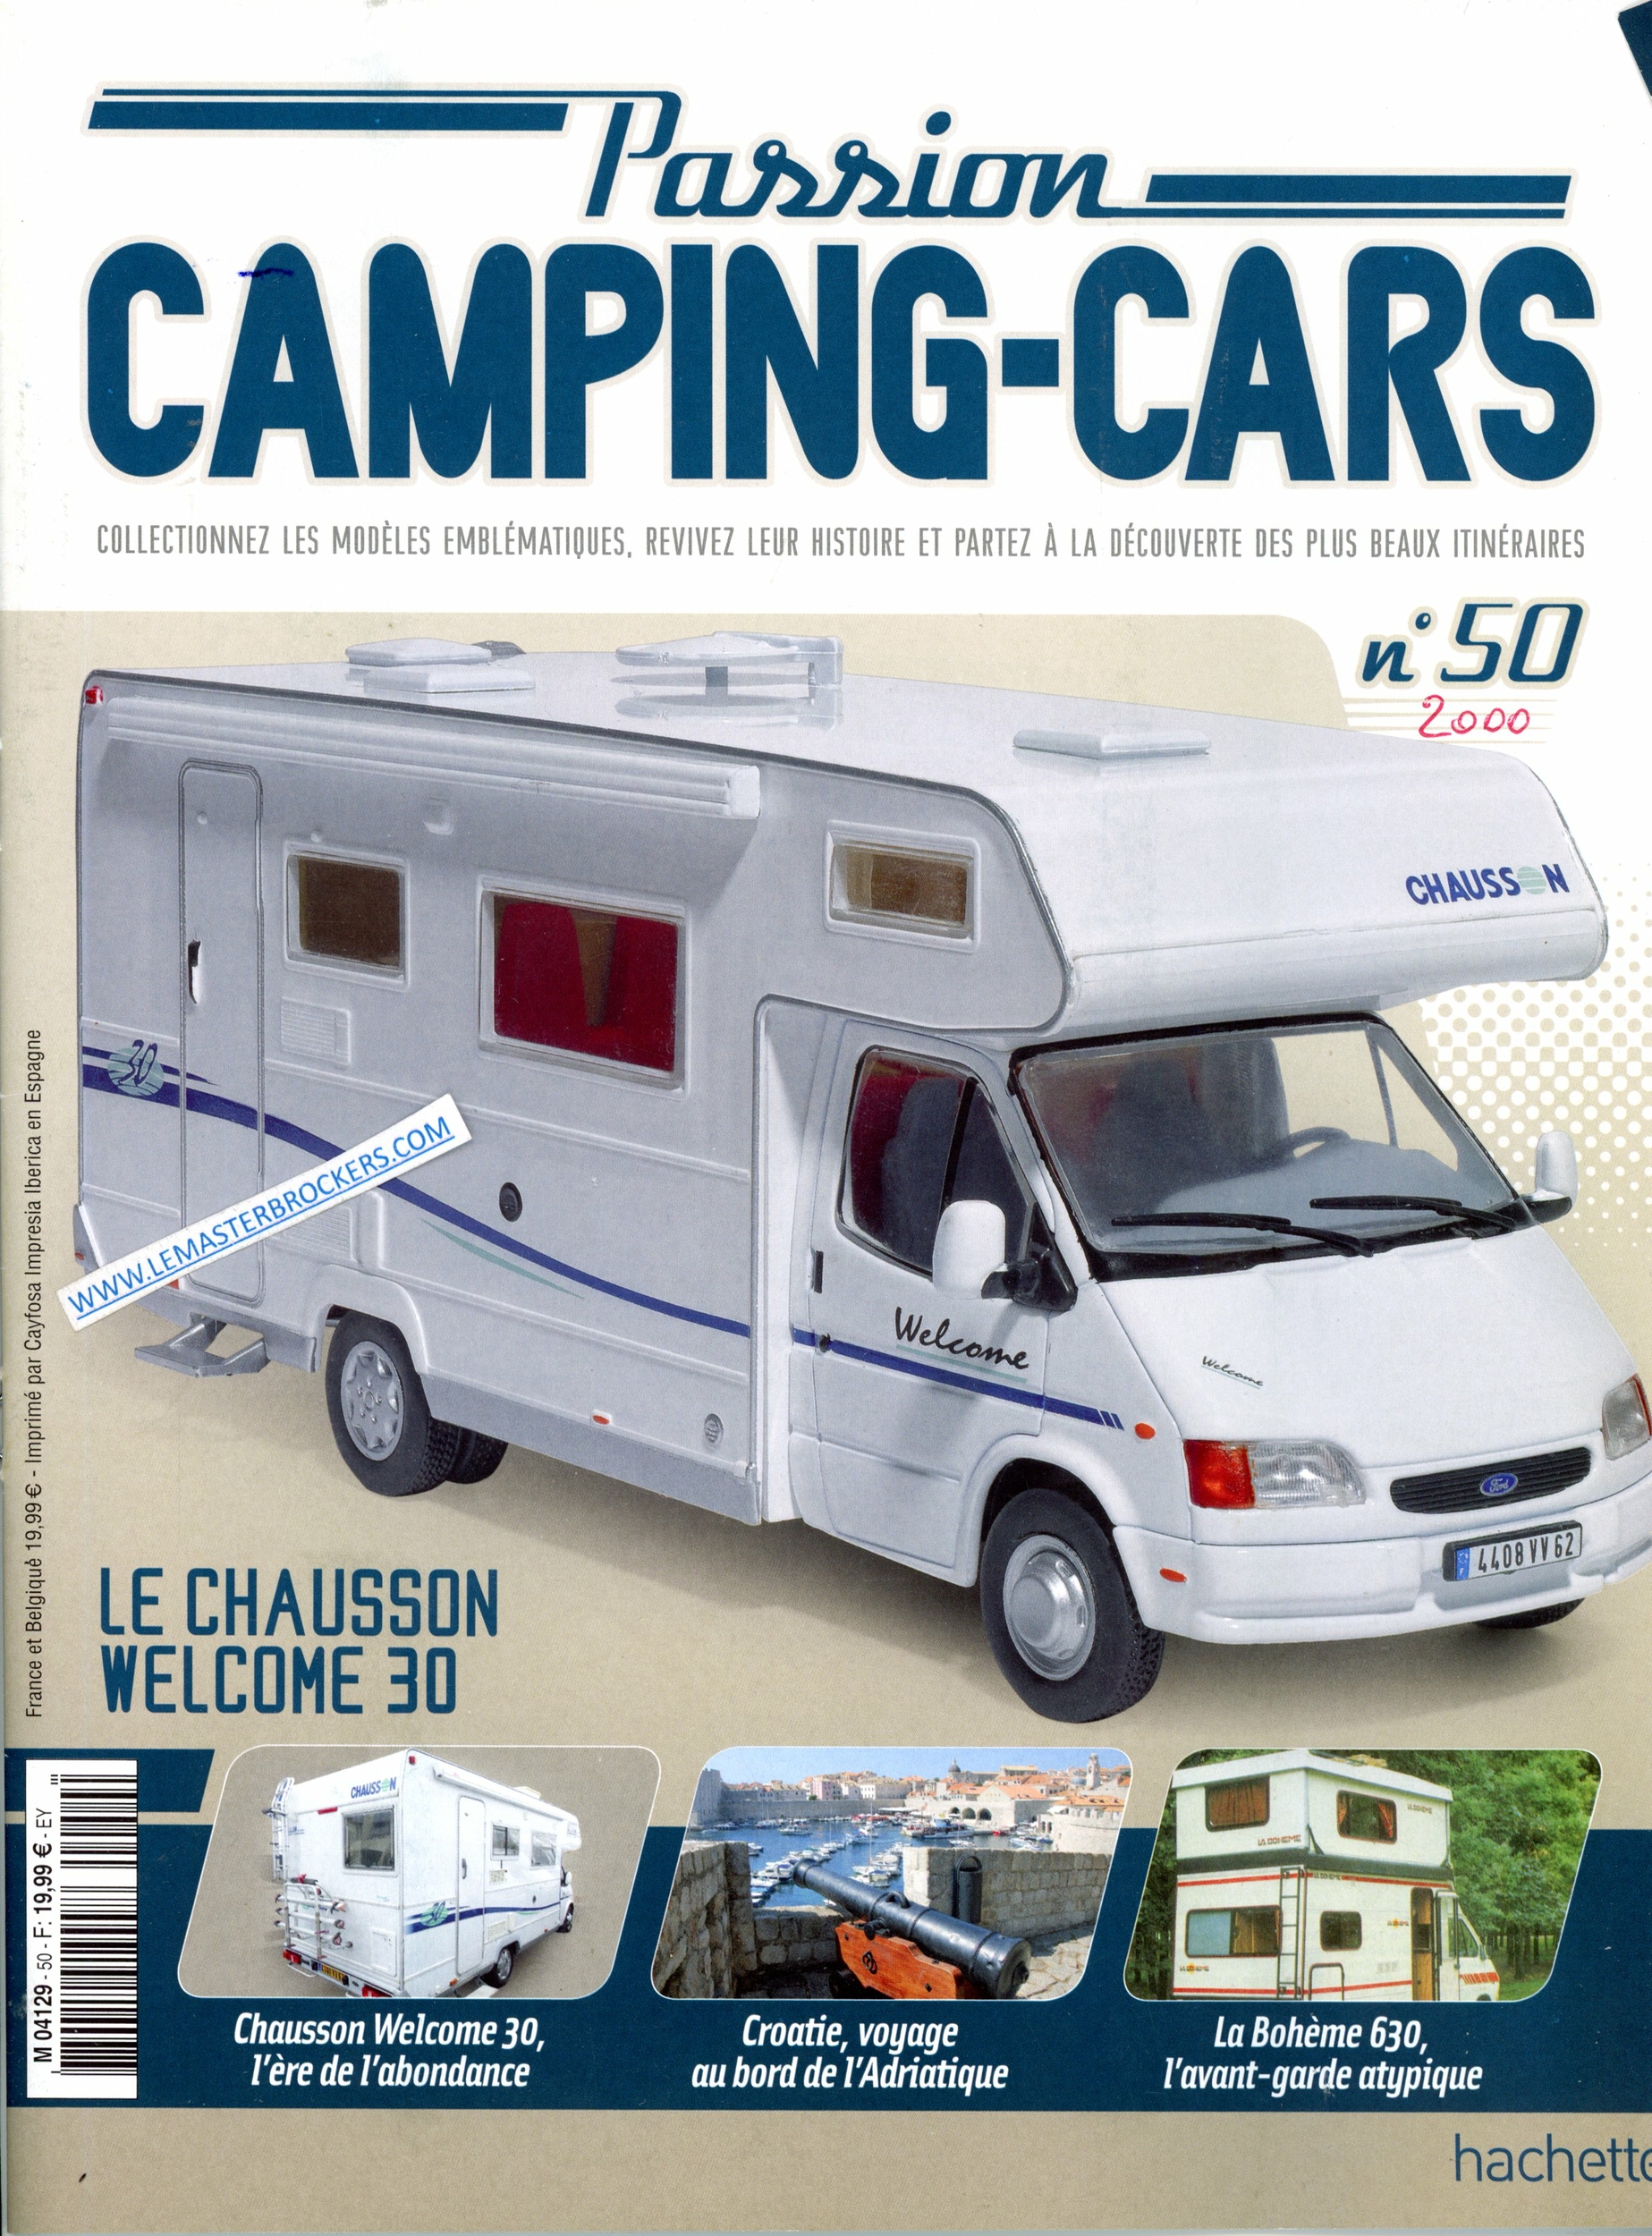 CHAUSSON WELCOME 30 PASSION CAMPING-CARS